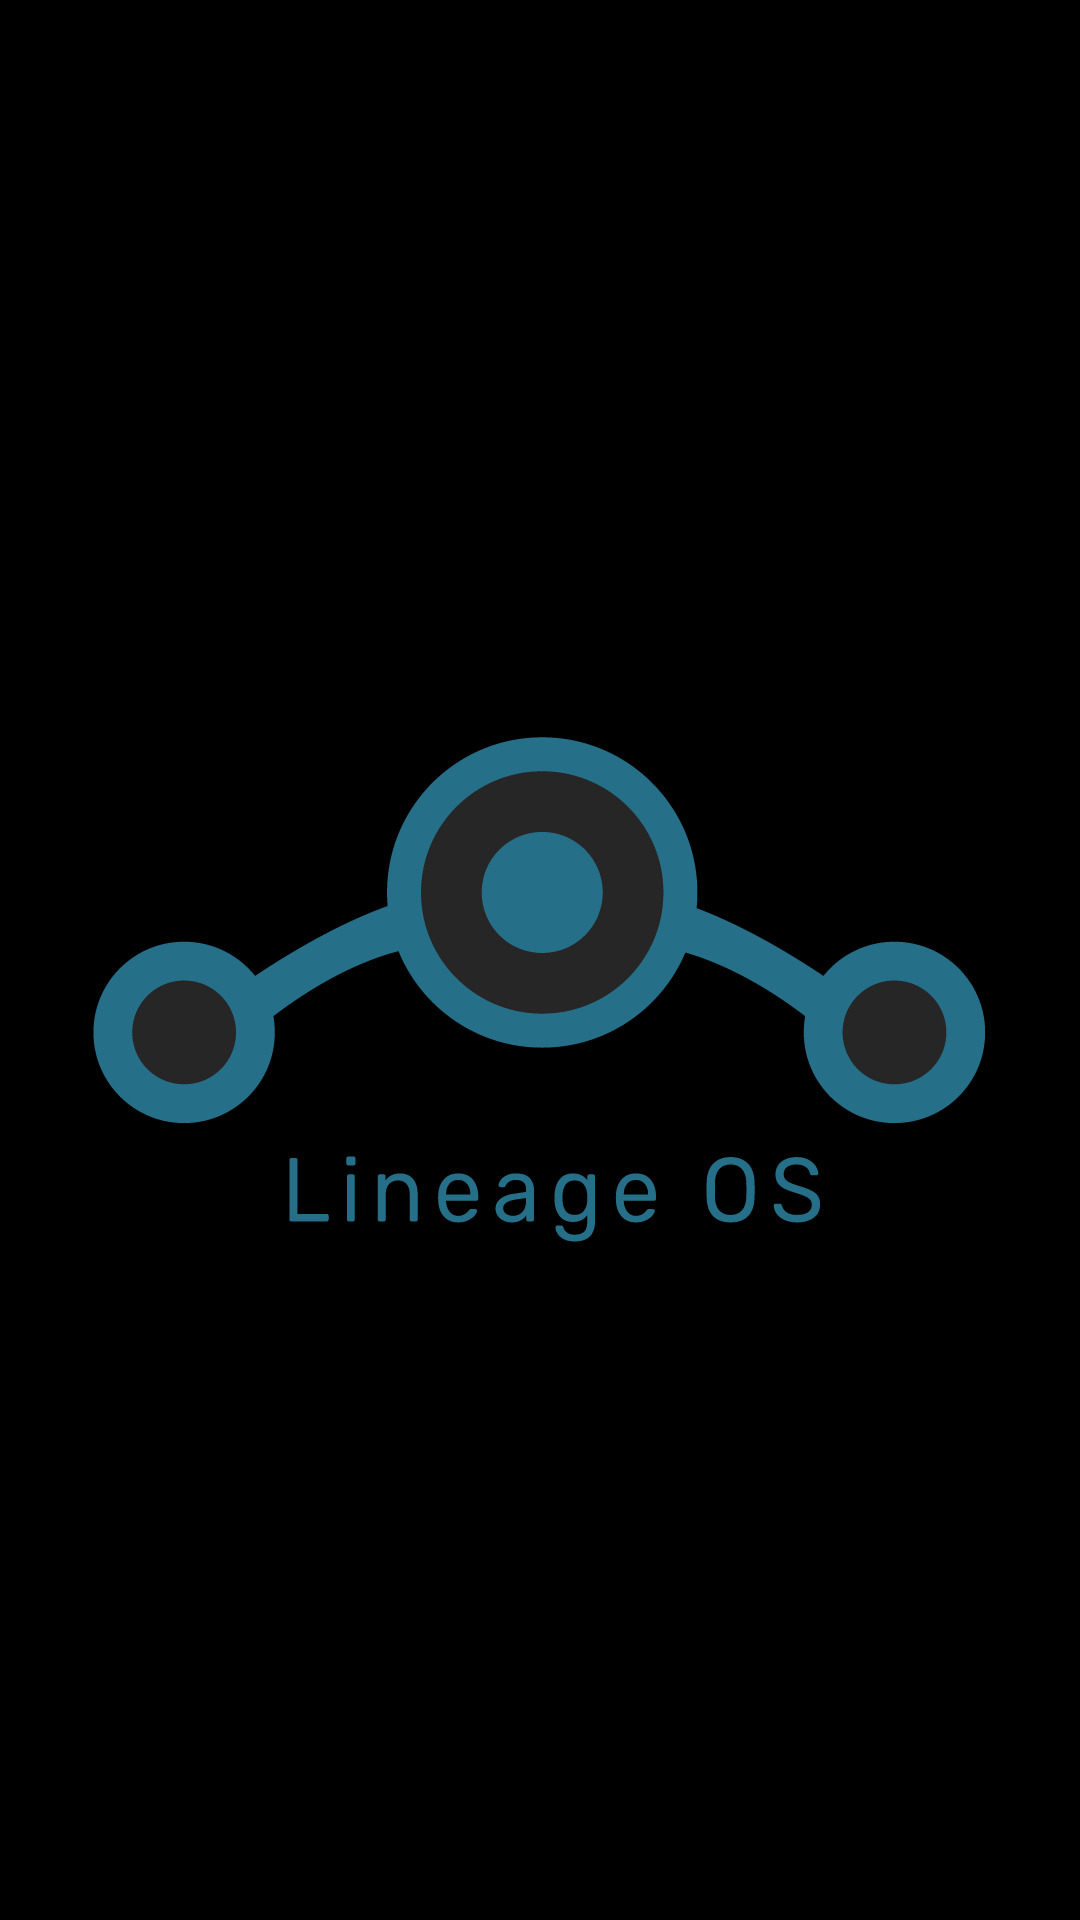 Lineage OS, Android (operating system), Minimalism, Simple background Wallpaper